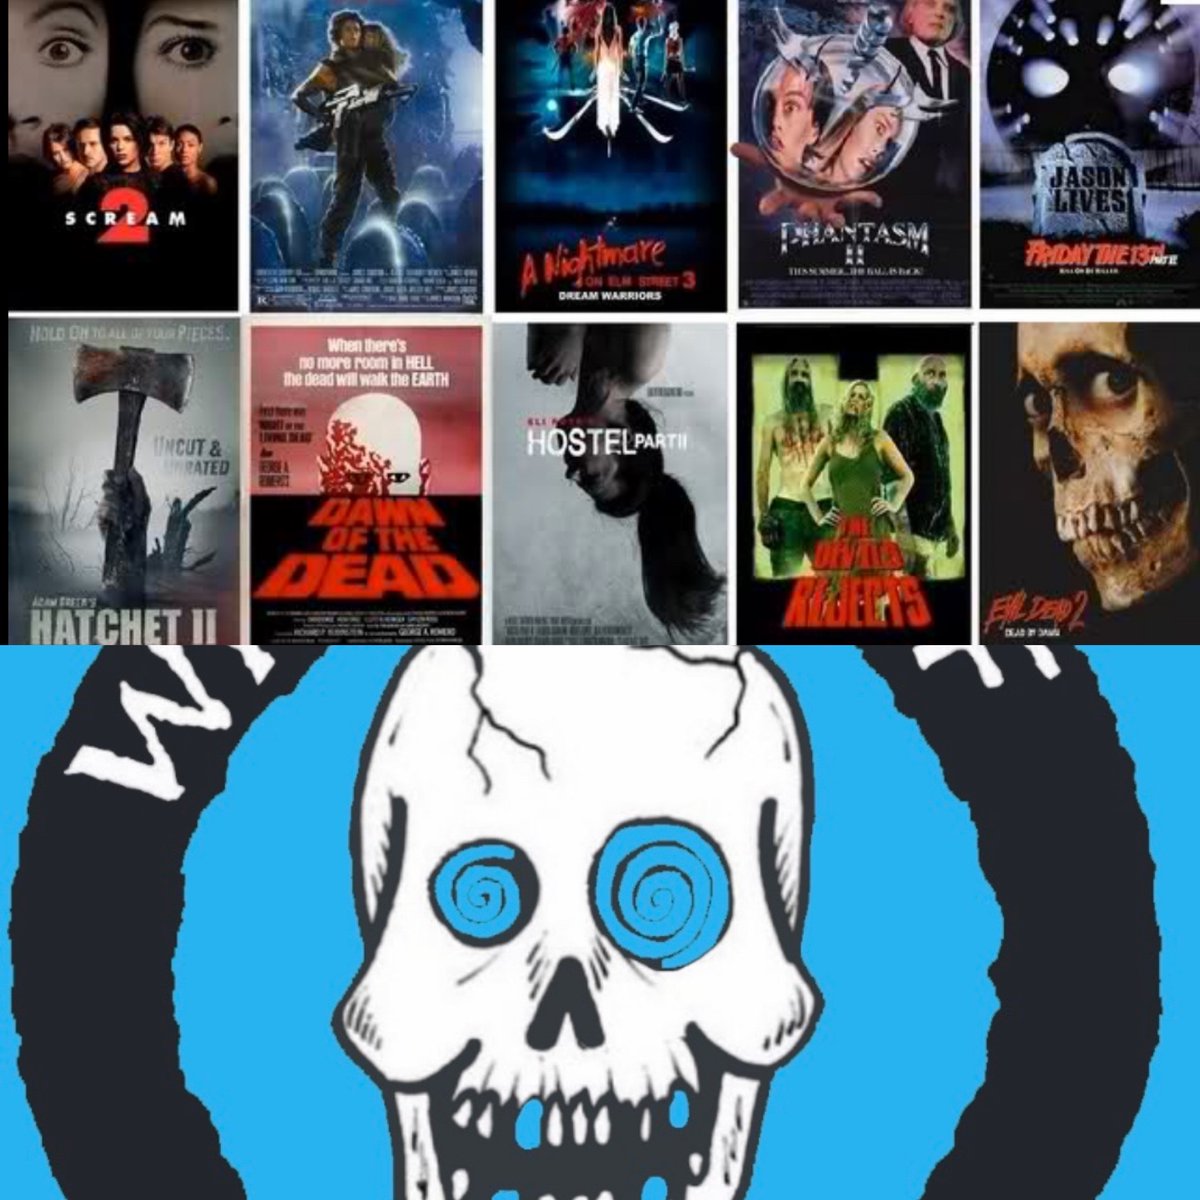 To finish off this Wheel of sequels, Alec & Erik will discuss and debate the greatest Horror sequels of all time. There will be a decisive winner! See if your favorite horror sequels films made our lists. New Wheel starts next week! Link to Episode: api.spreaker.com/v2/episodes/59…